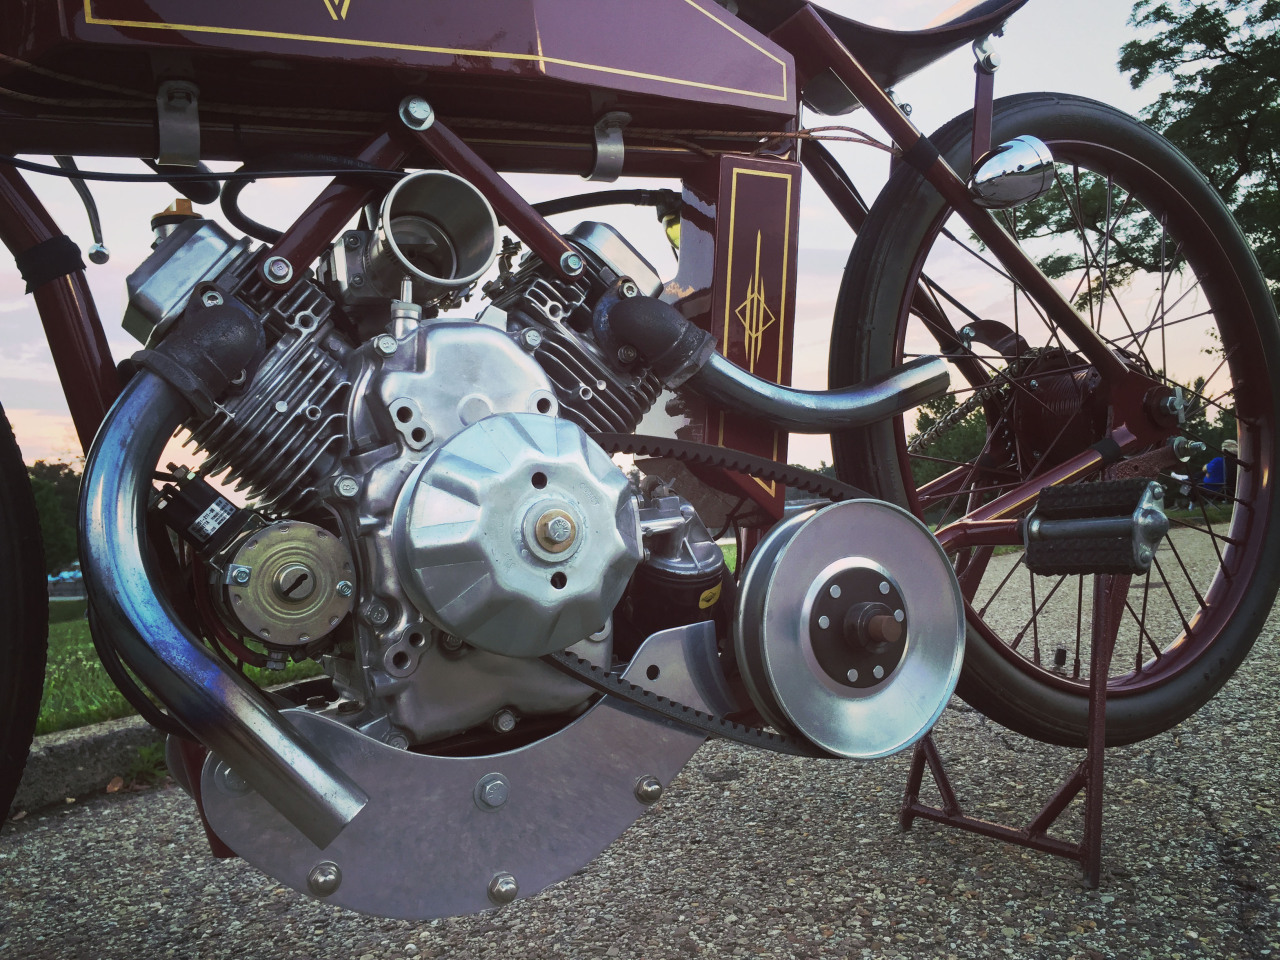 Lurker's V-twin build | Motorized Bicycle Engine Kit Forum